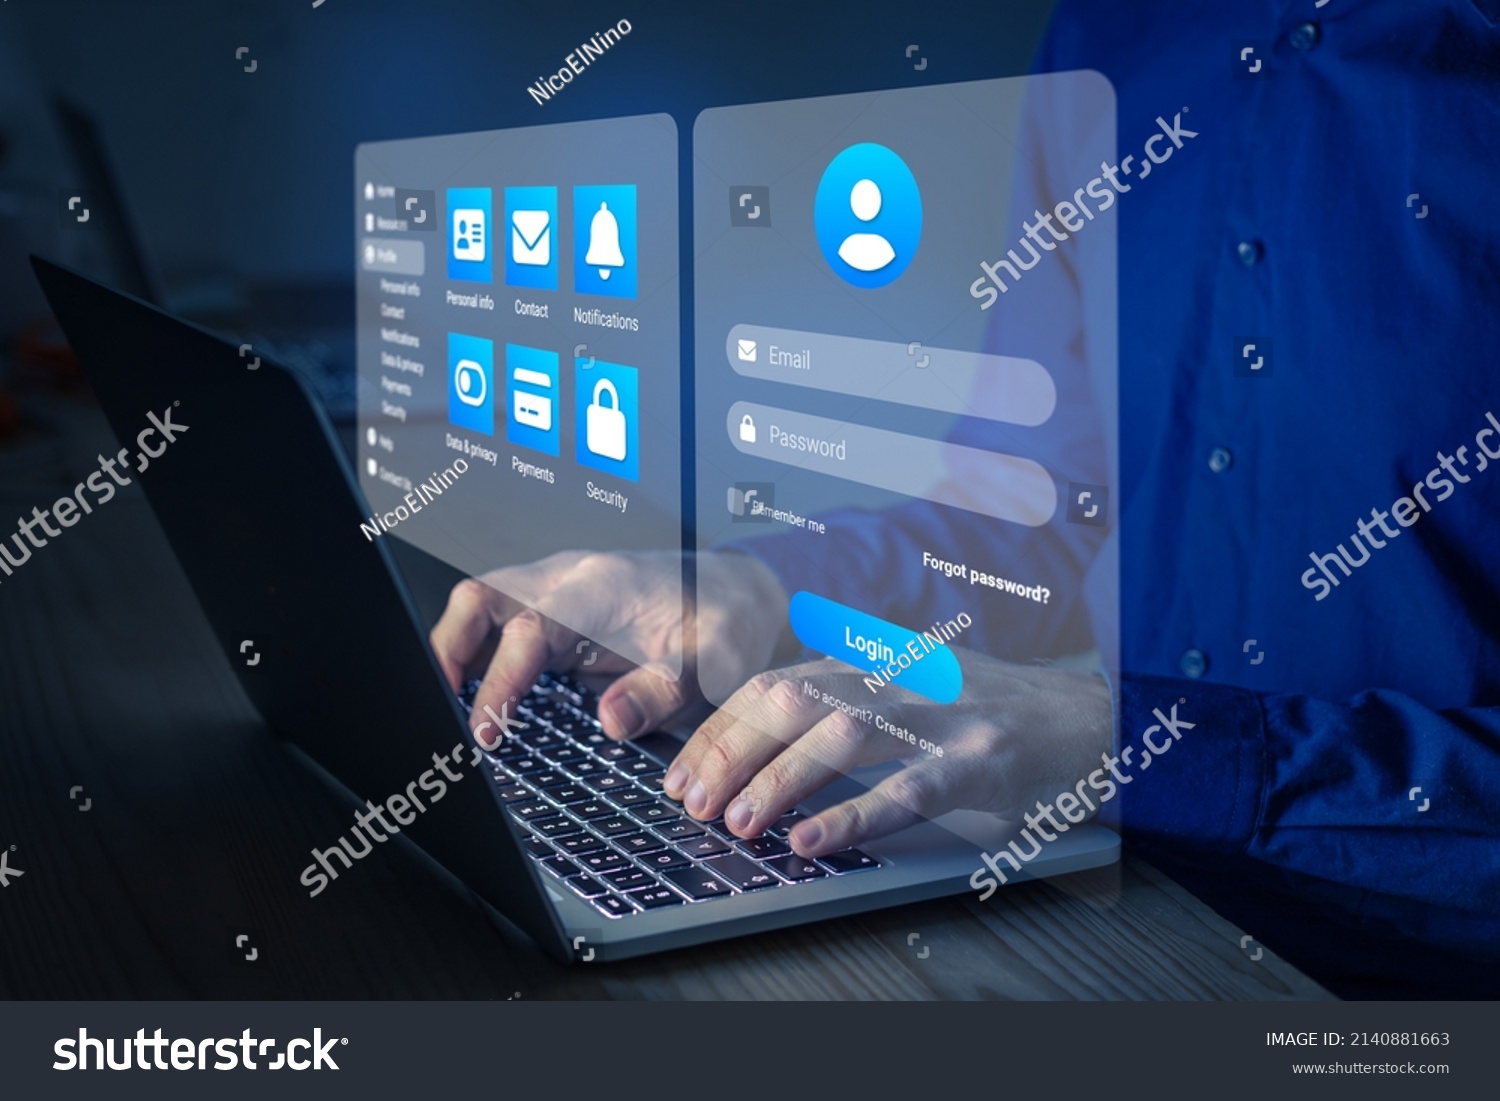 Secure online access with password and login page to manage personal profile account. Secured connection and data security on internet. Cybersecurity and sign in form. User working on laptop computer. #2140881663